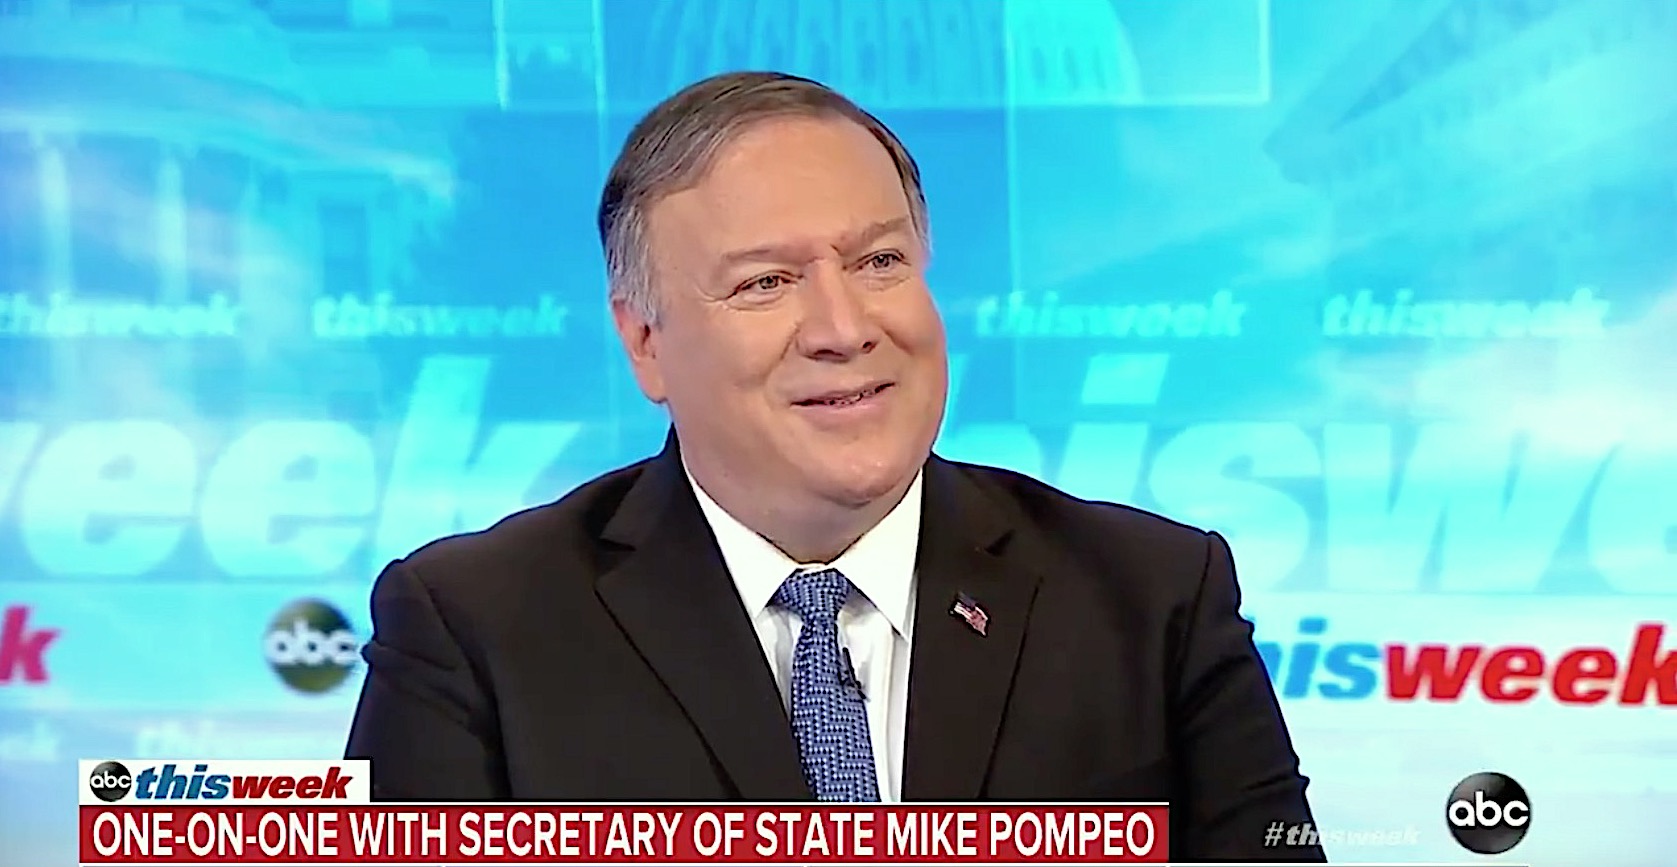 Mike Pompeo talks about a purge